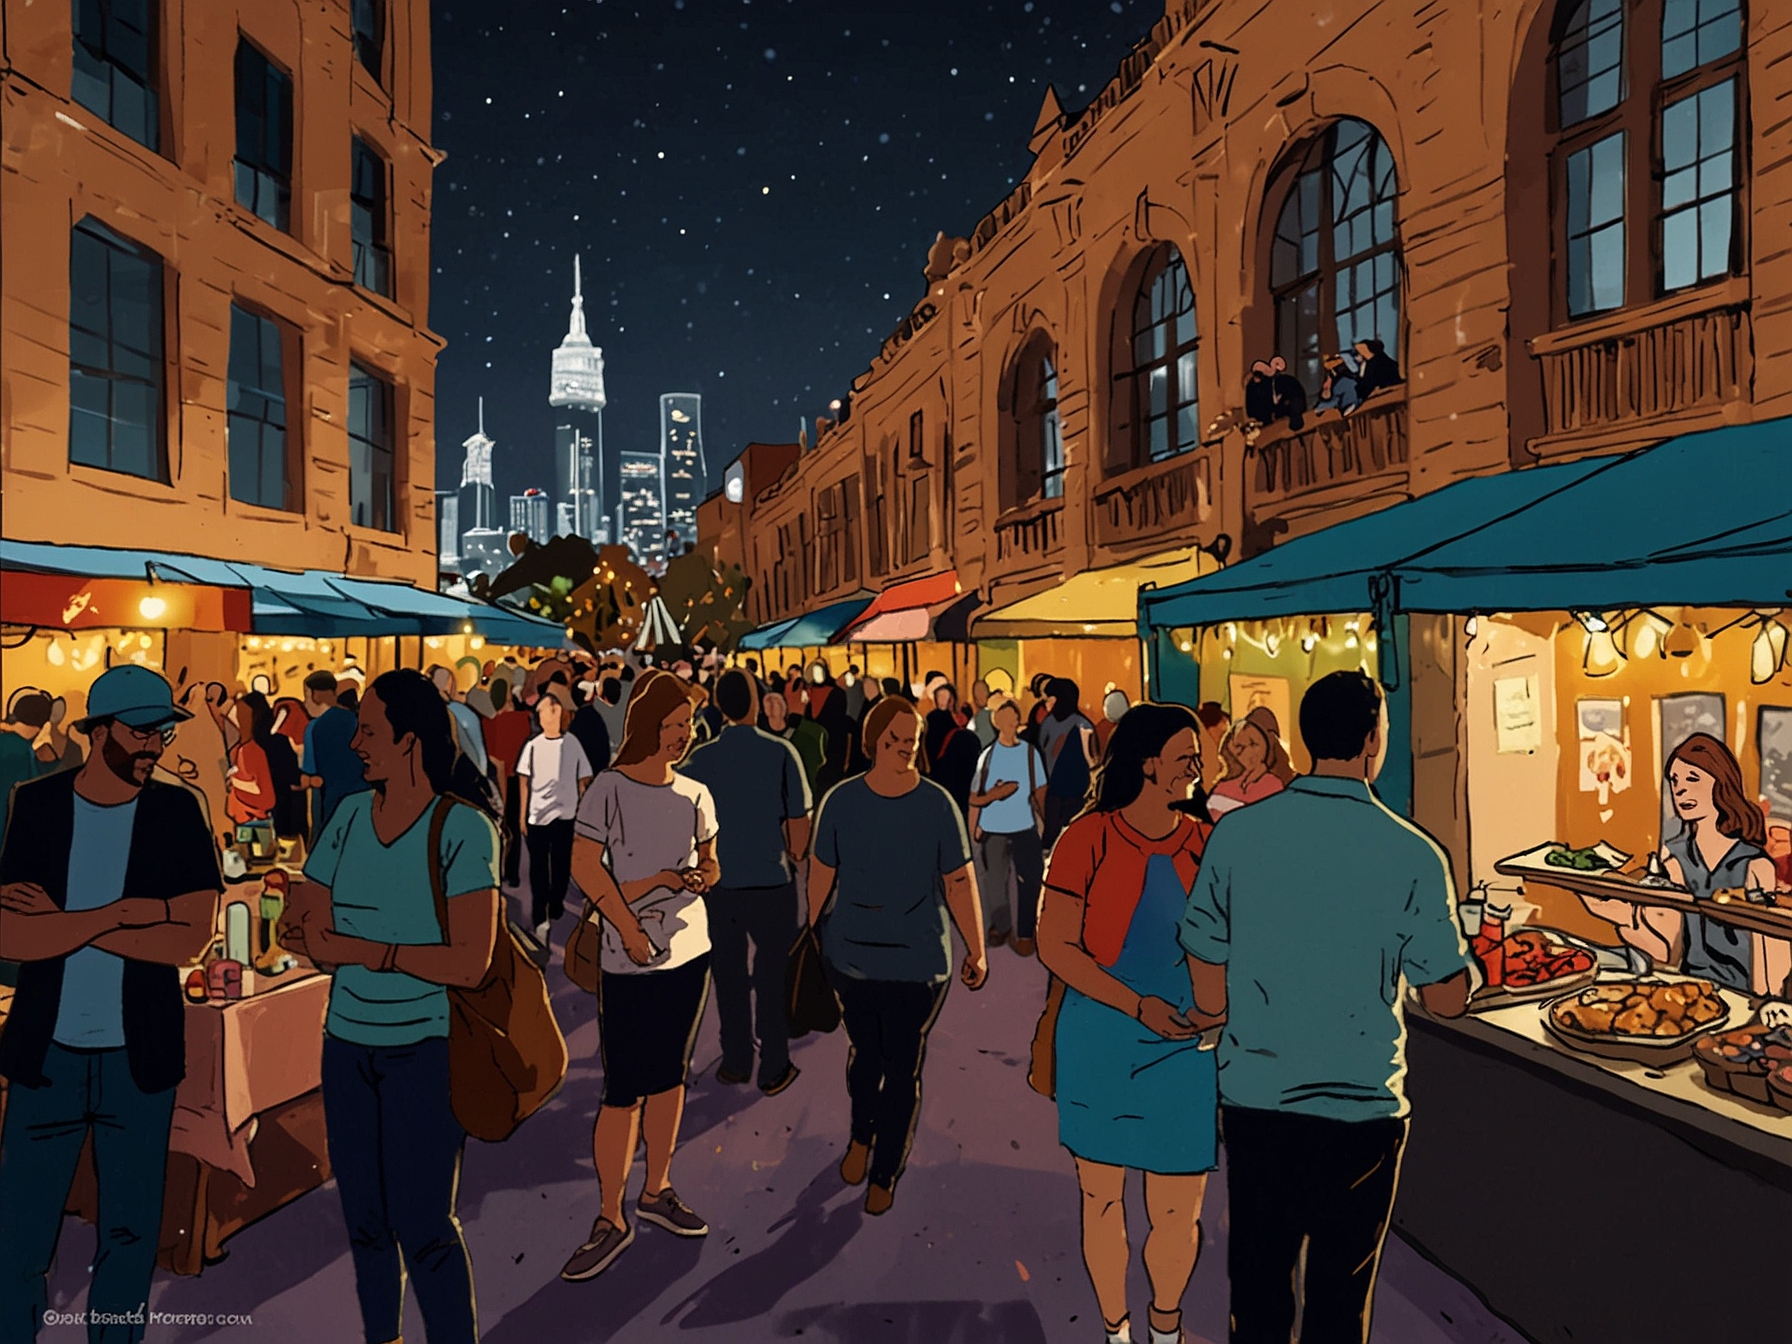 Attendees enjoying the Vivid Sydney Night Market at The Rocks, sampling an array of gourmet dishes. A lively atmosphere with colorful lights and diverse food stalls creating a festive culinary journey.